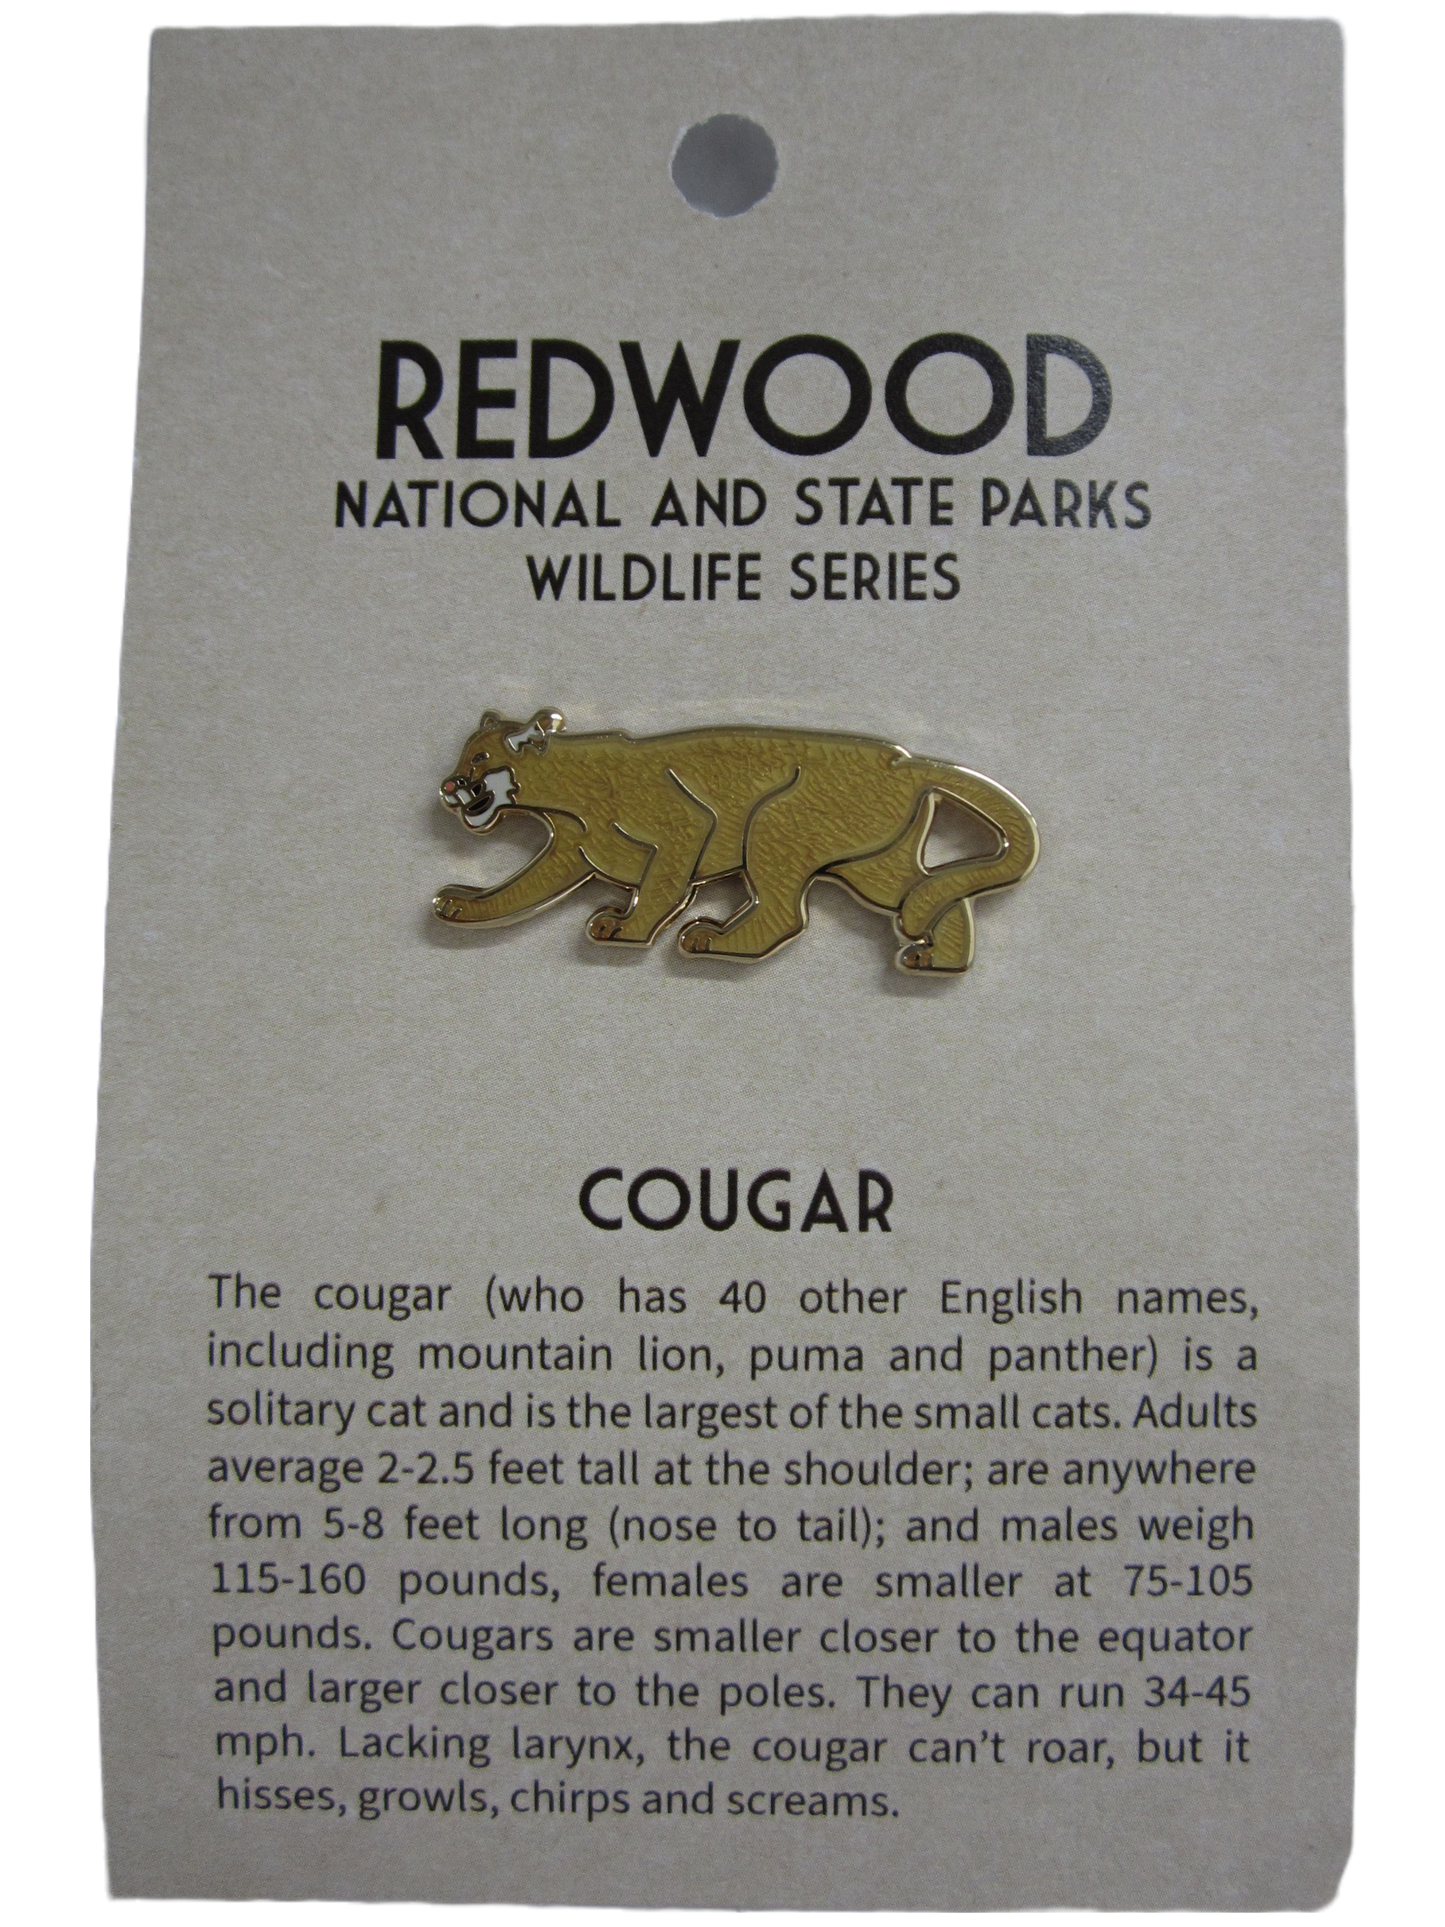 Redwood National & Stgate Parks Wildlife Series Cougar Collector's Pin